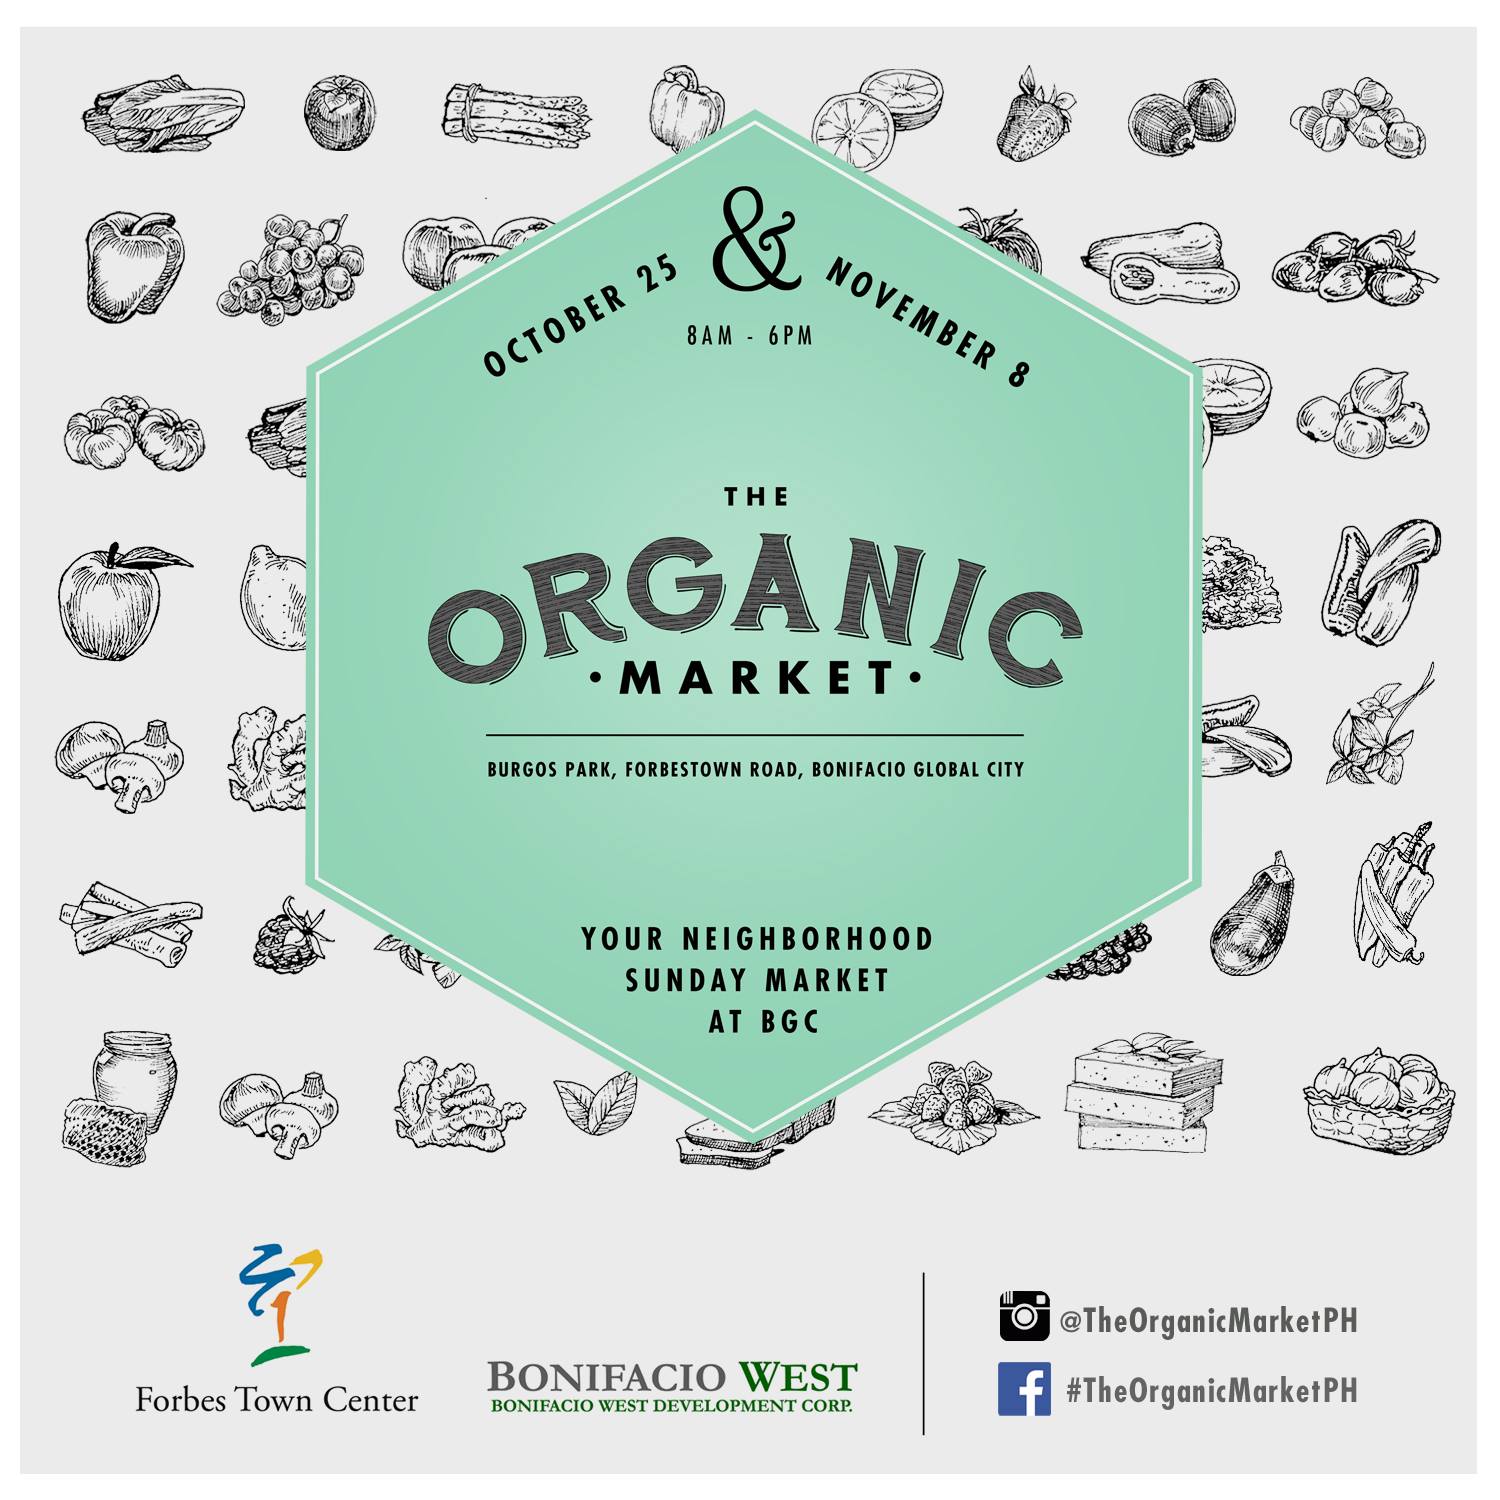 The Organic Market at Burgos Park BGC Sunday, October 25 at 8:00am - 6:00pm 4 days from now · 90°F / 75°F Chance of a Thunderstorm Show Map Forbes Town Fort Bonifacio Taguig, Philippines The Organic Market is a well-curated local Sunday market that specializes in Organic and Natural products for the conscious consumer. It is a weekly one-stop-shop for foodies, health advocates, organic believers and anyone seeking a hip and fun Sunday market experience. With the number of health conscious consumers growing exponentially throughout Manila, there is no mistaking that there is a growing demand for a “better” alternative to the usual factory processed, chemical filled food options that plague our groceries. The Organic Market team has actively worked to put together a curated list of like-minded vendors and suppliers in a one of a kind Sunday Market experience. ---- We are very excited to announce that The Organic Market is finally launching this October 25, 2015 in Burgos Park, Forbestown Road, Bonifacio Global City from 8AM-6PM. See you all there and follow our Instagram page @TheOrganicMarketPH and Facebook page for updates! #TheOrganicMarketPH